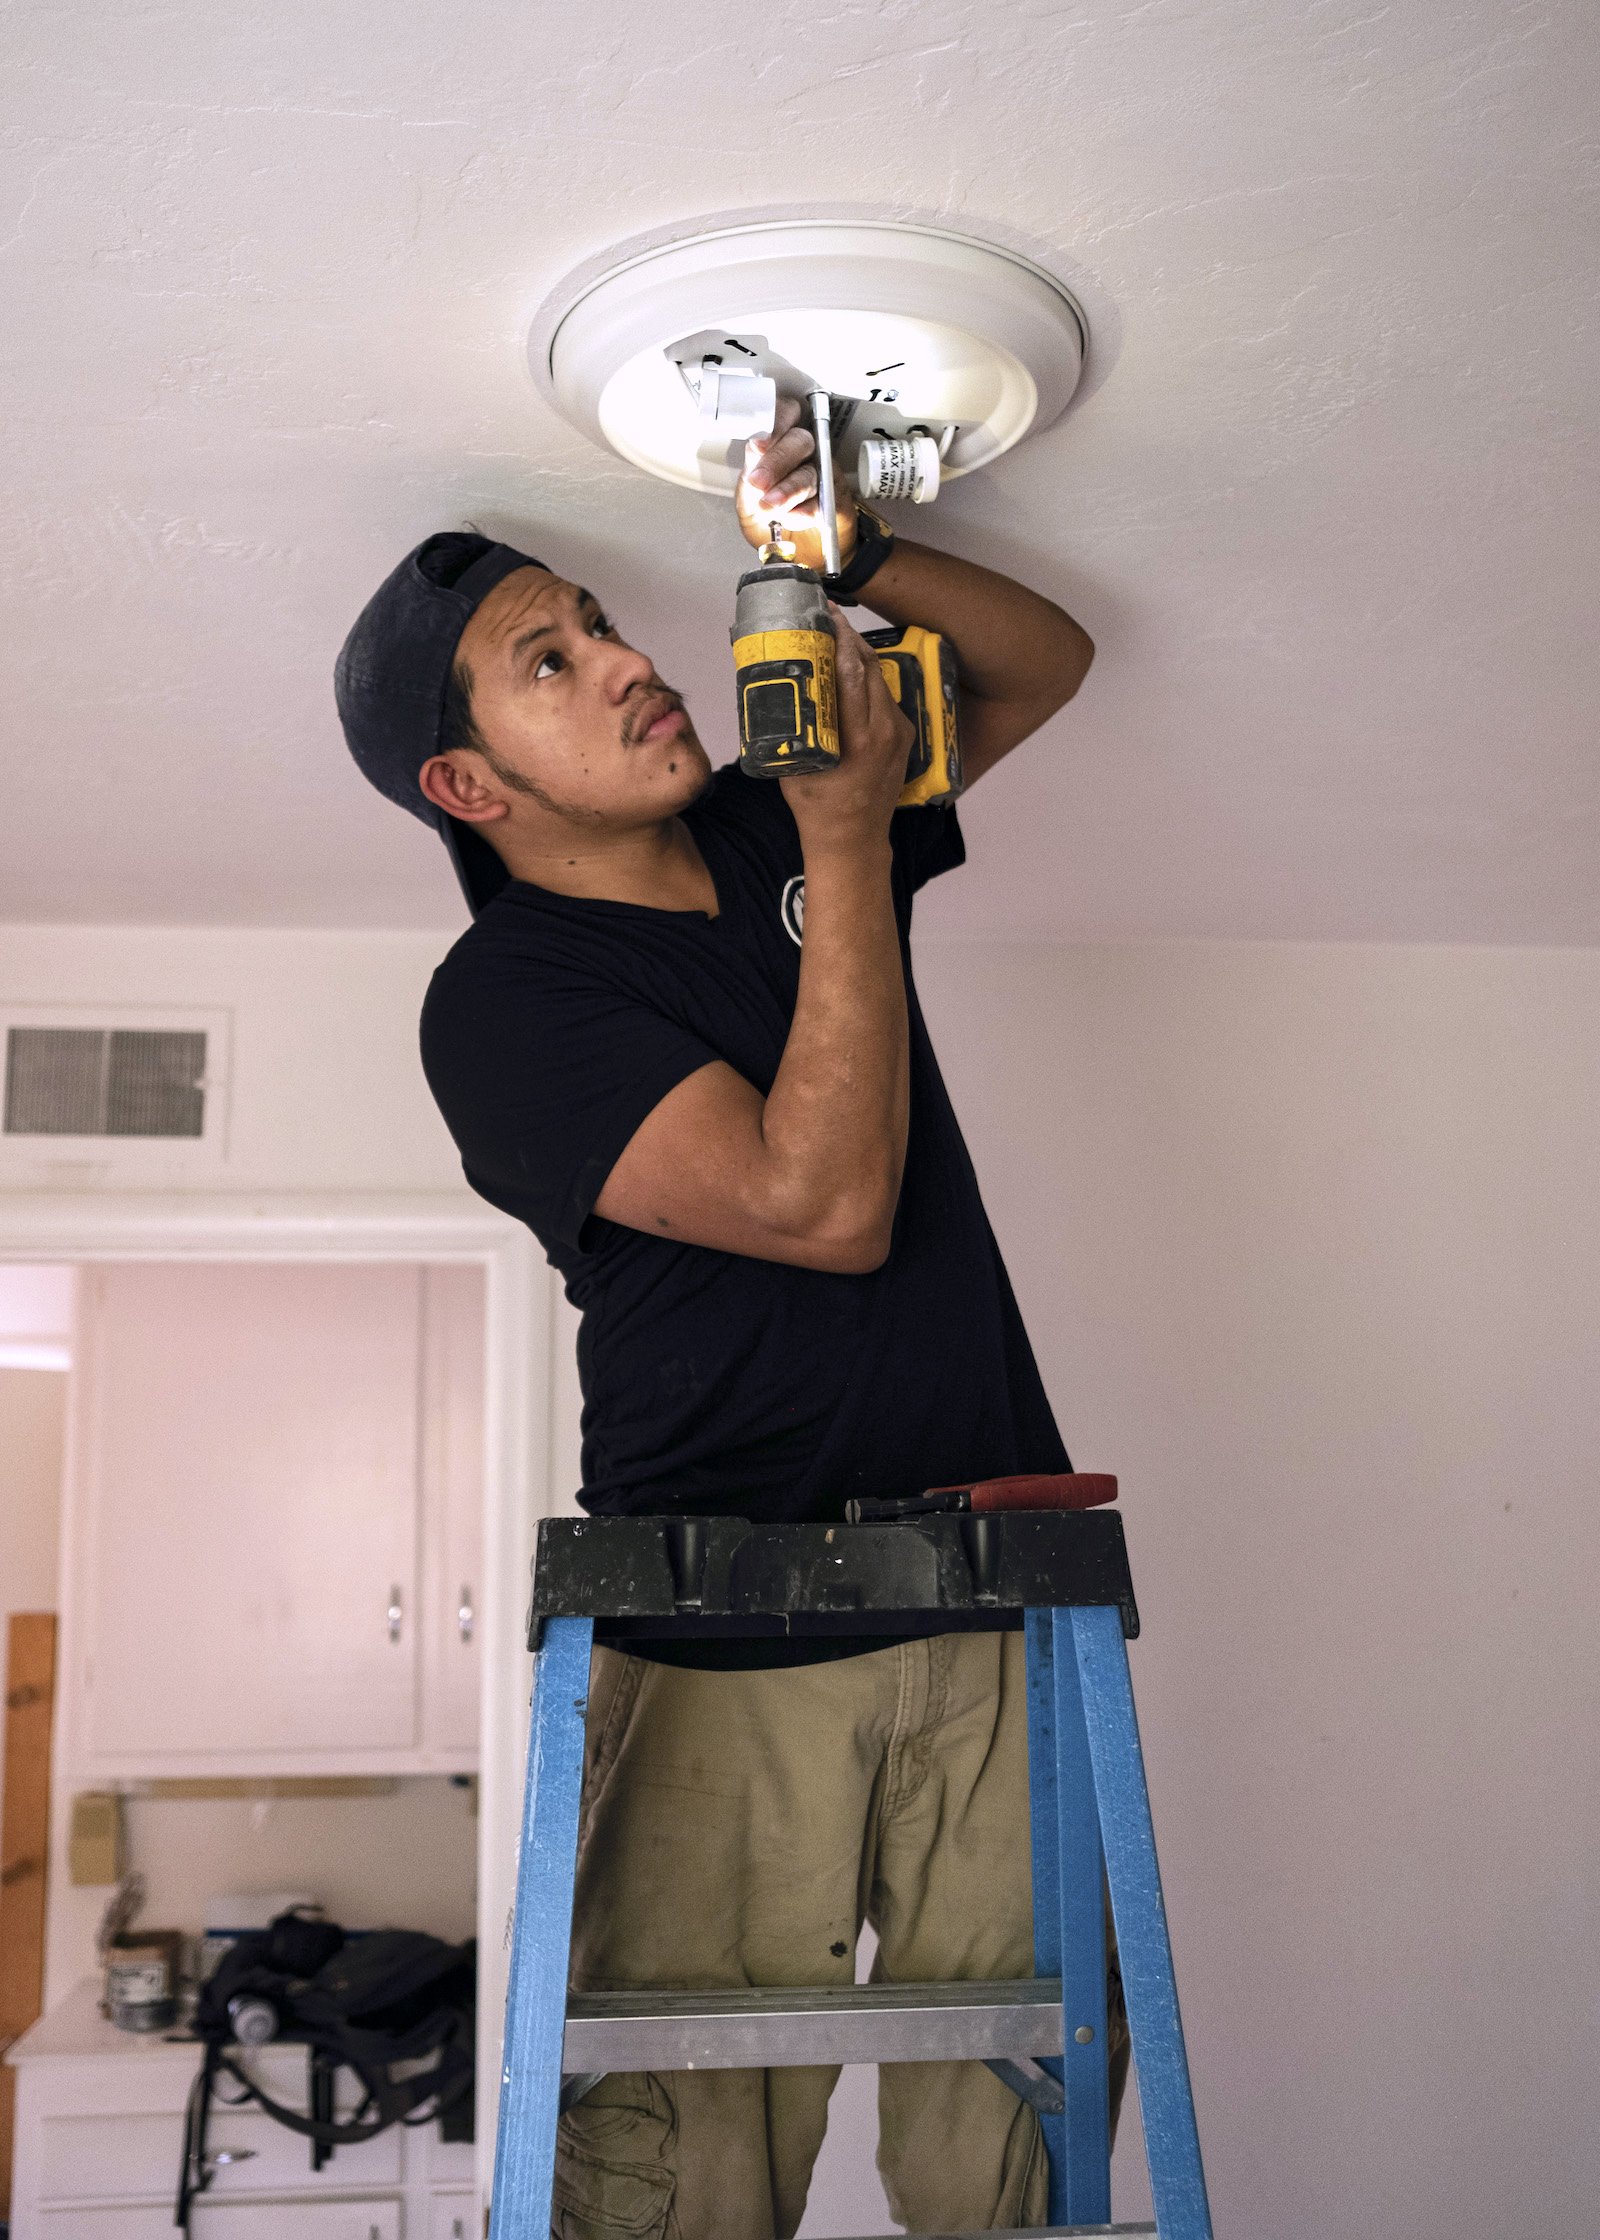 a man in a black t-shirt stands on a blue ladder using tools on a light fixture